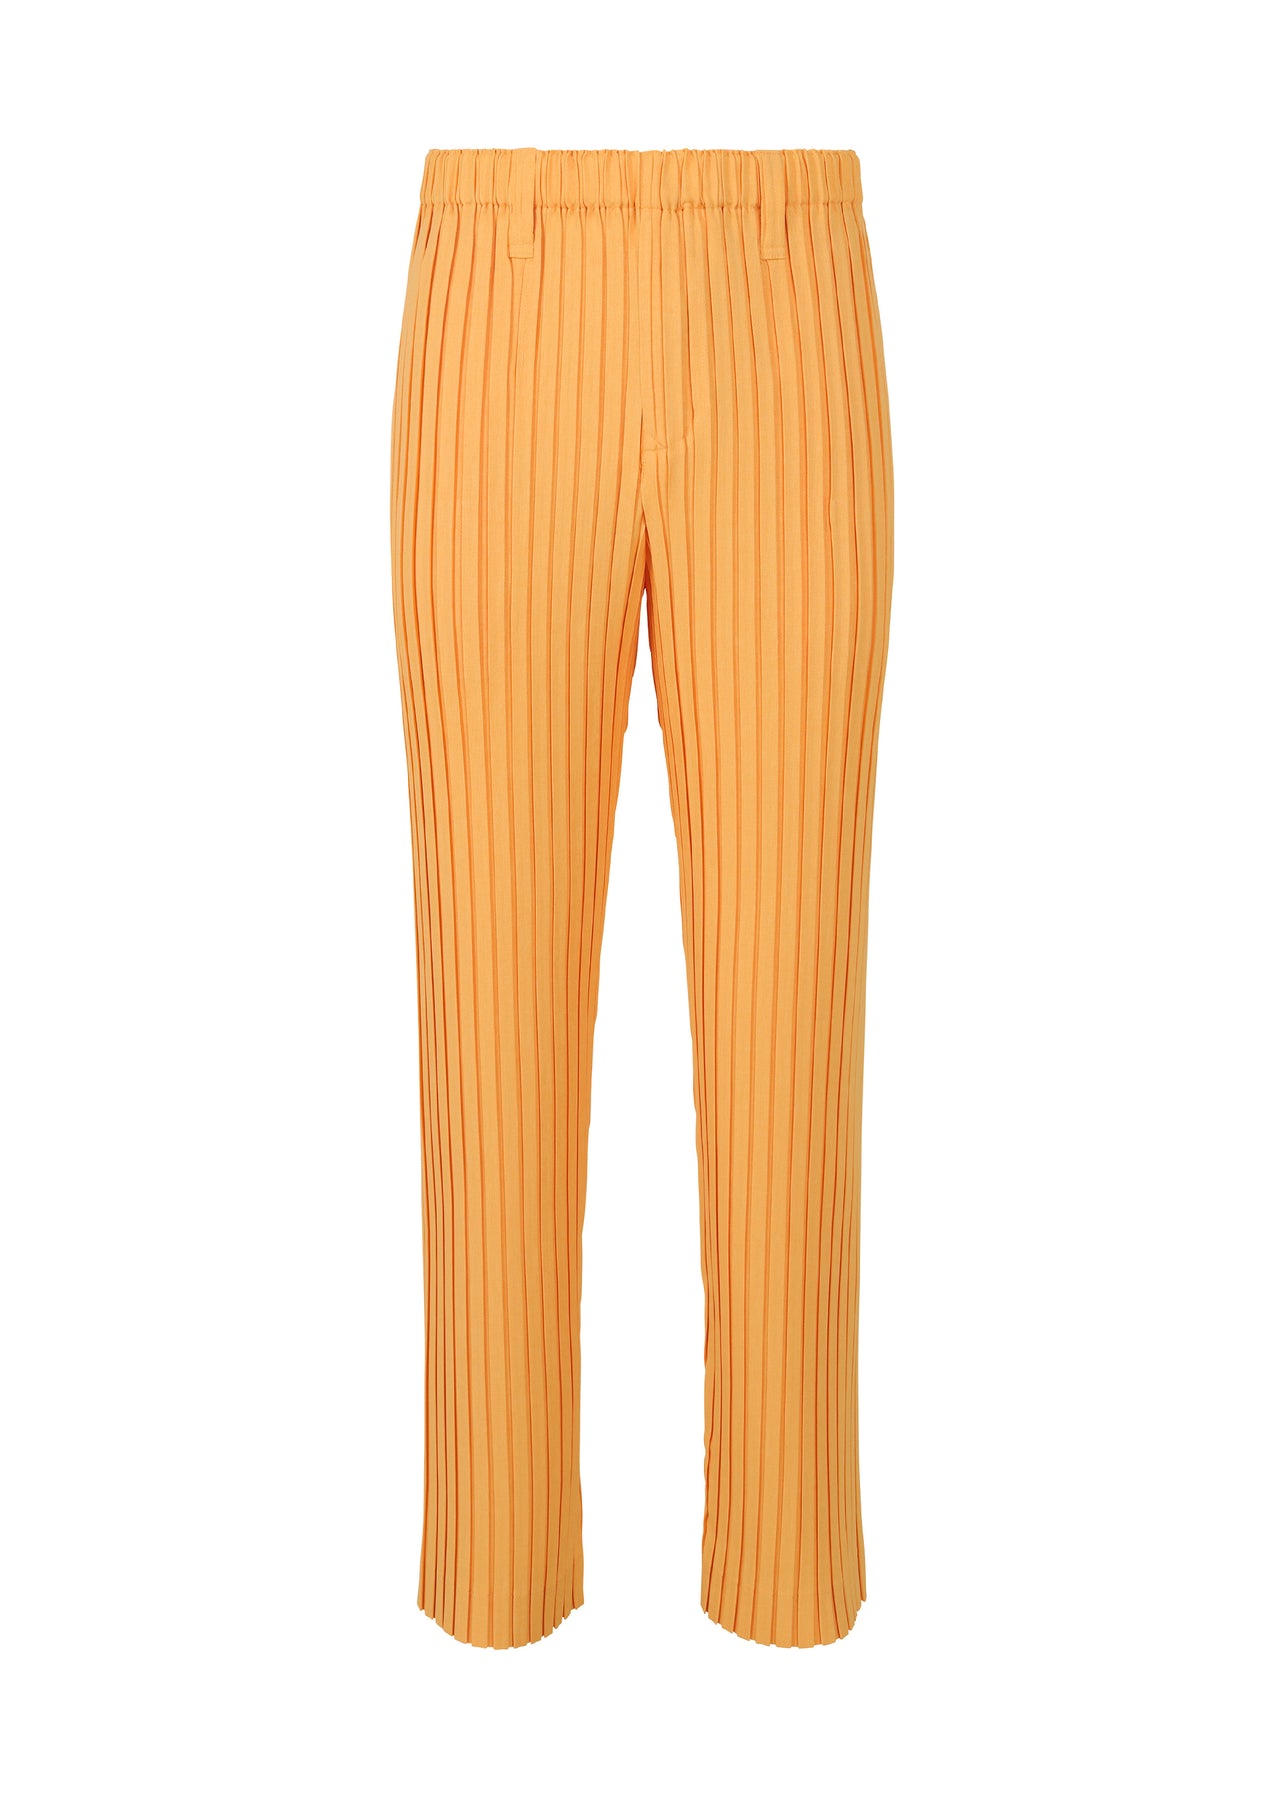 BOX PLEATS ENSEMBLE PANTS | The official ISSEY MIYAKE ONLINE STORE 